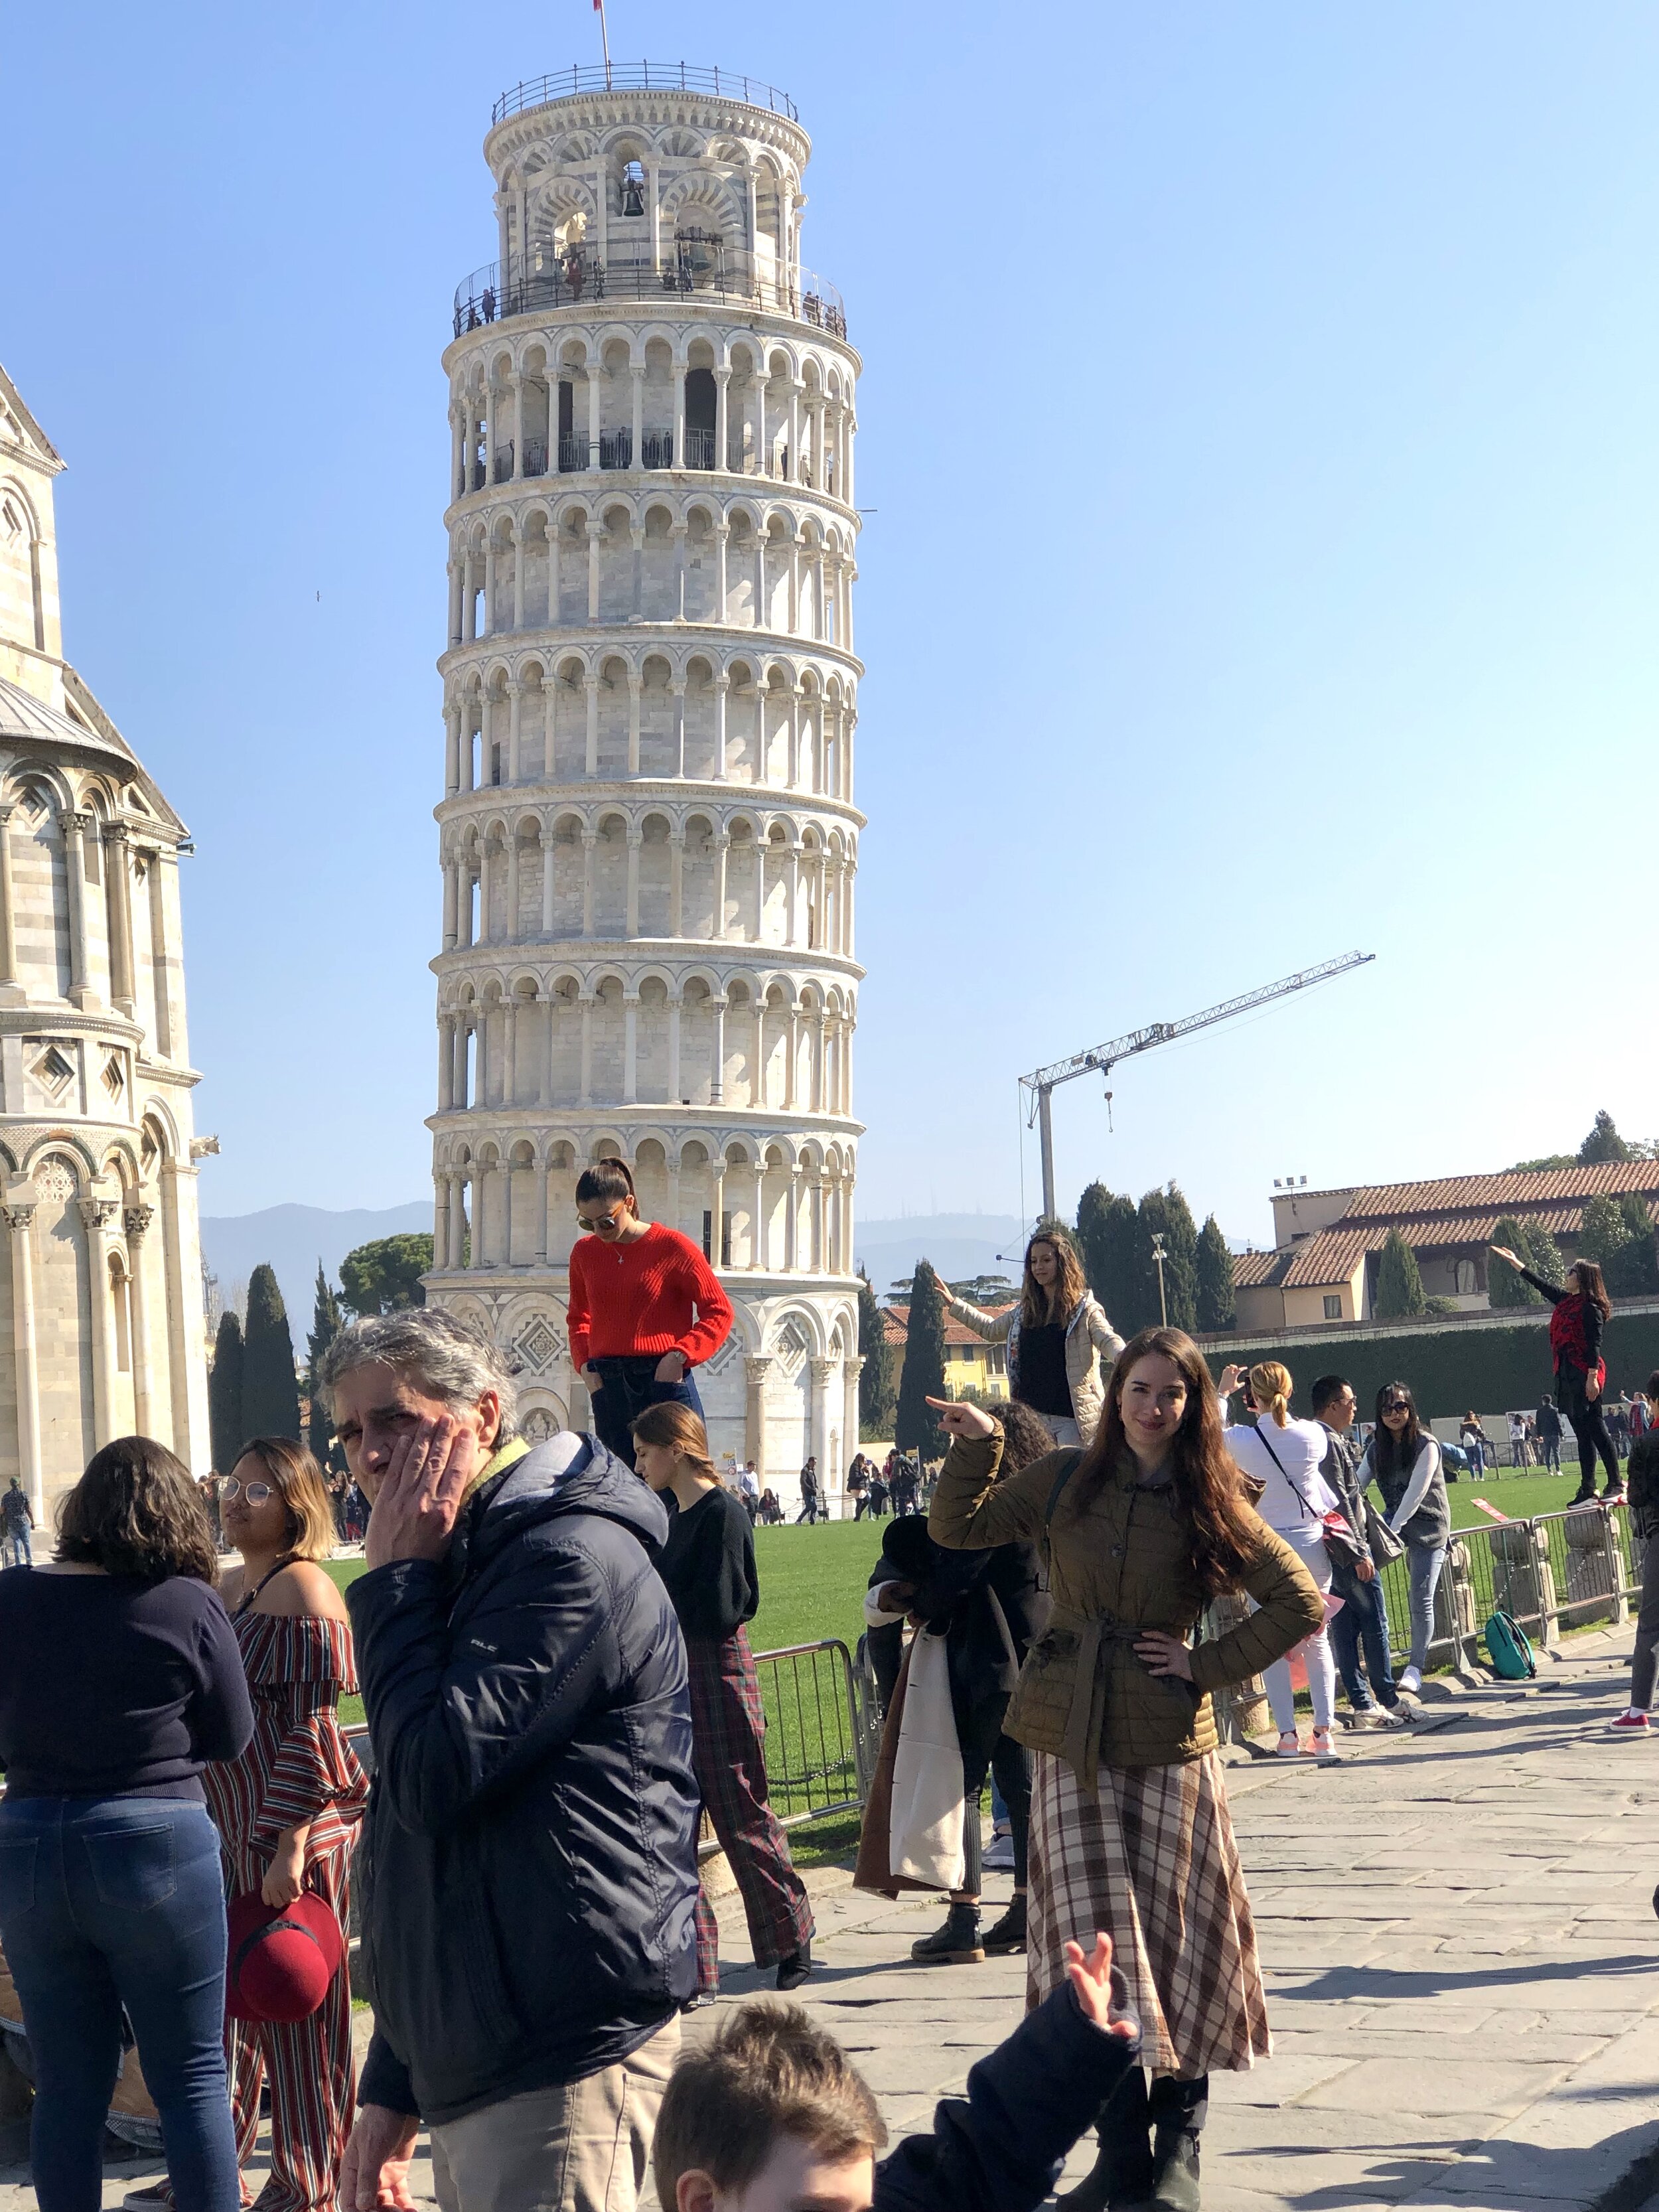  can you tell by my face how thrilled I am to be taking the “iconic” Leaning Tower photo? 